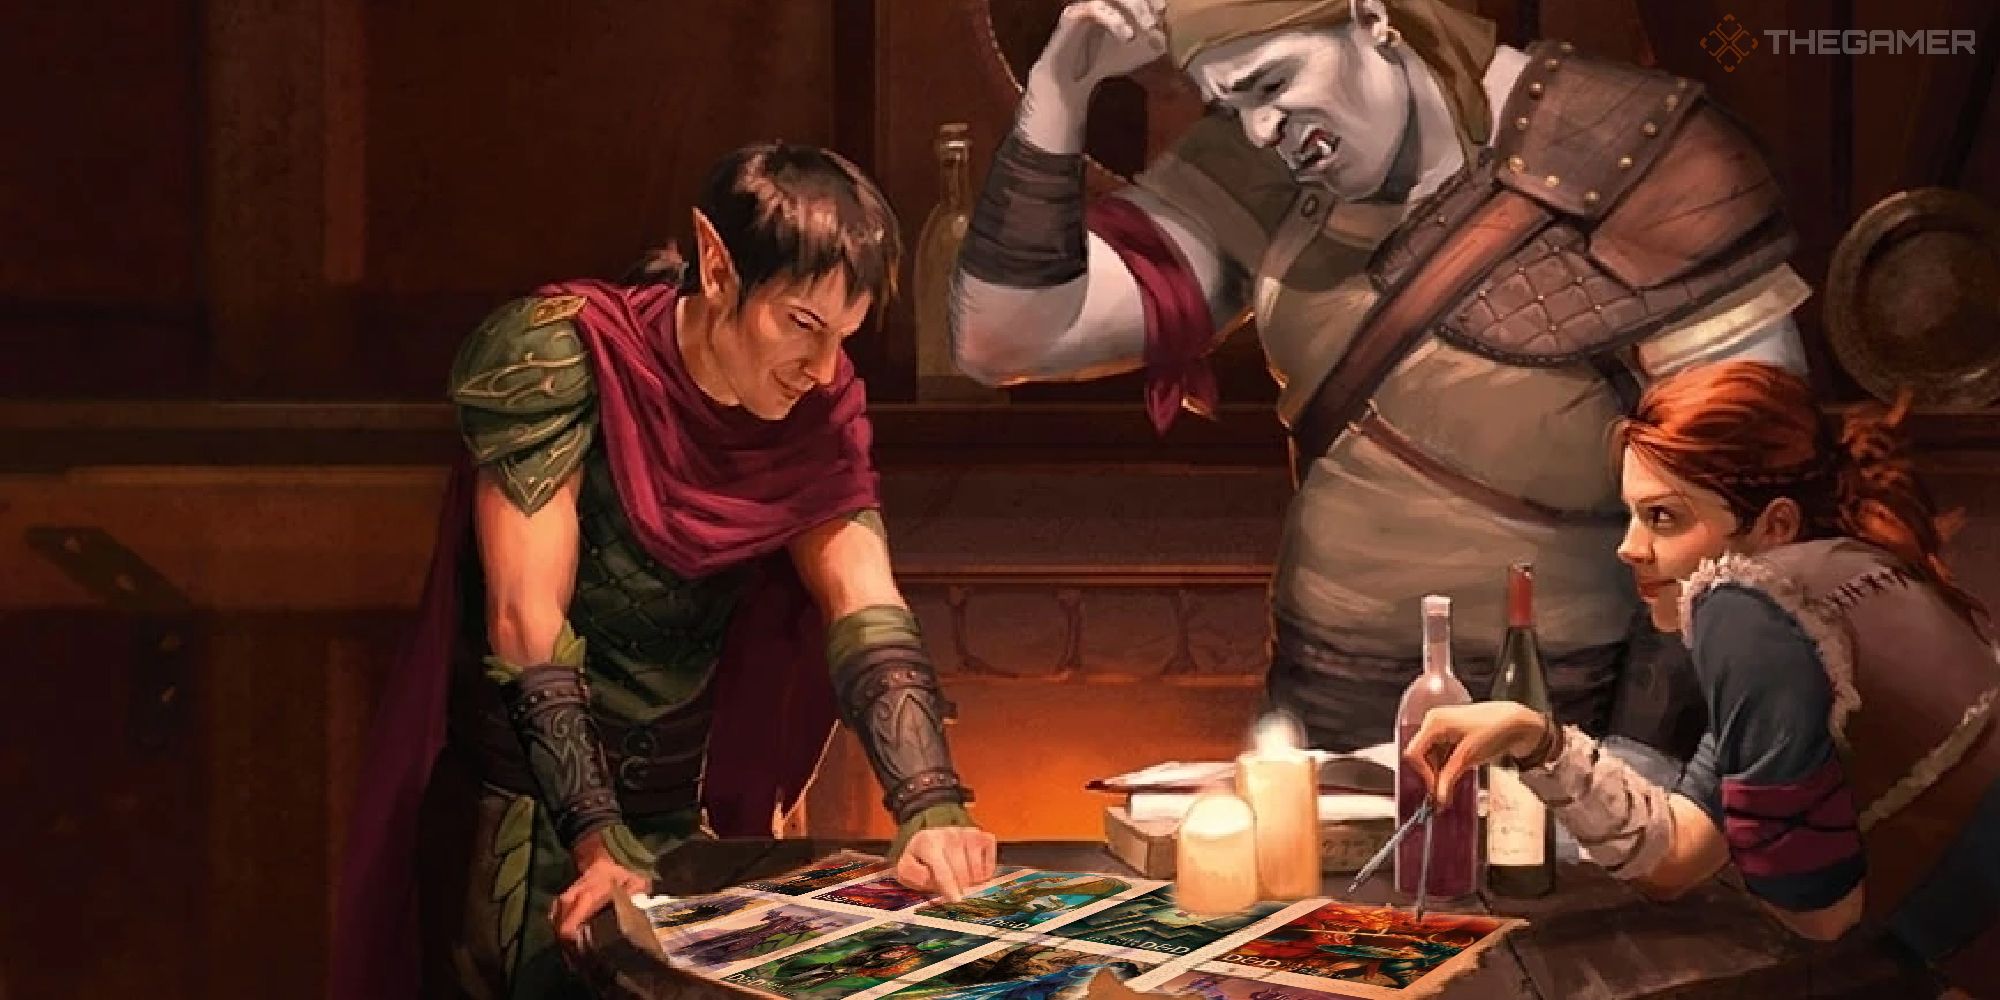 D&D characters looking at a sheet of D&D stamps